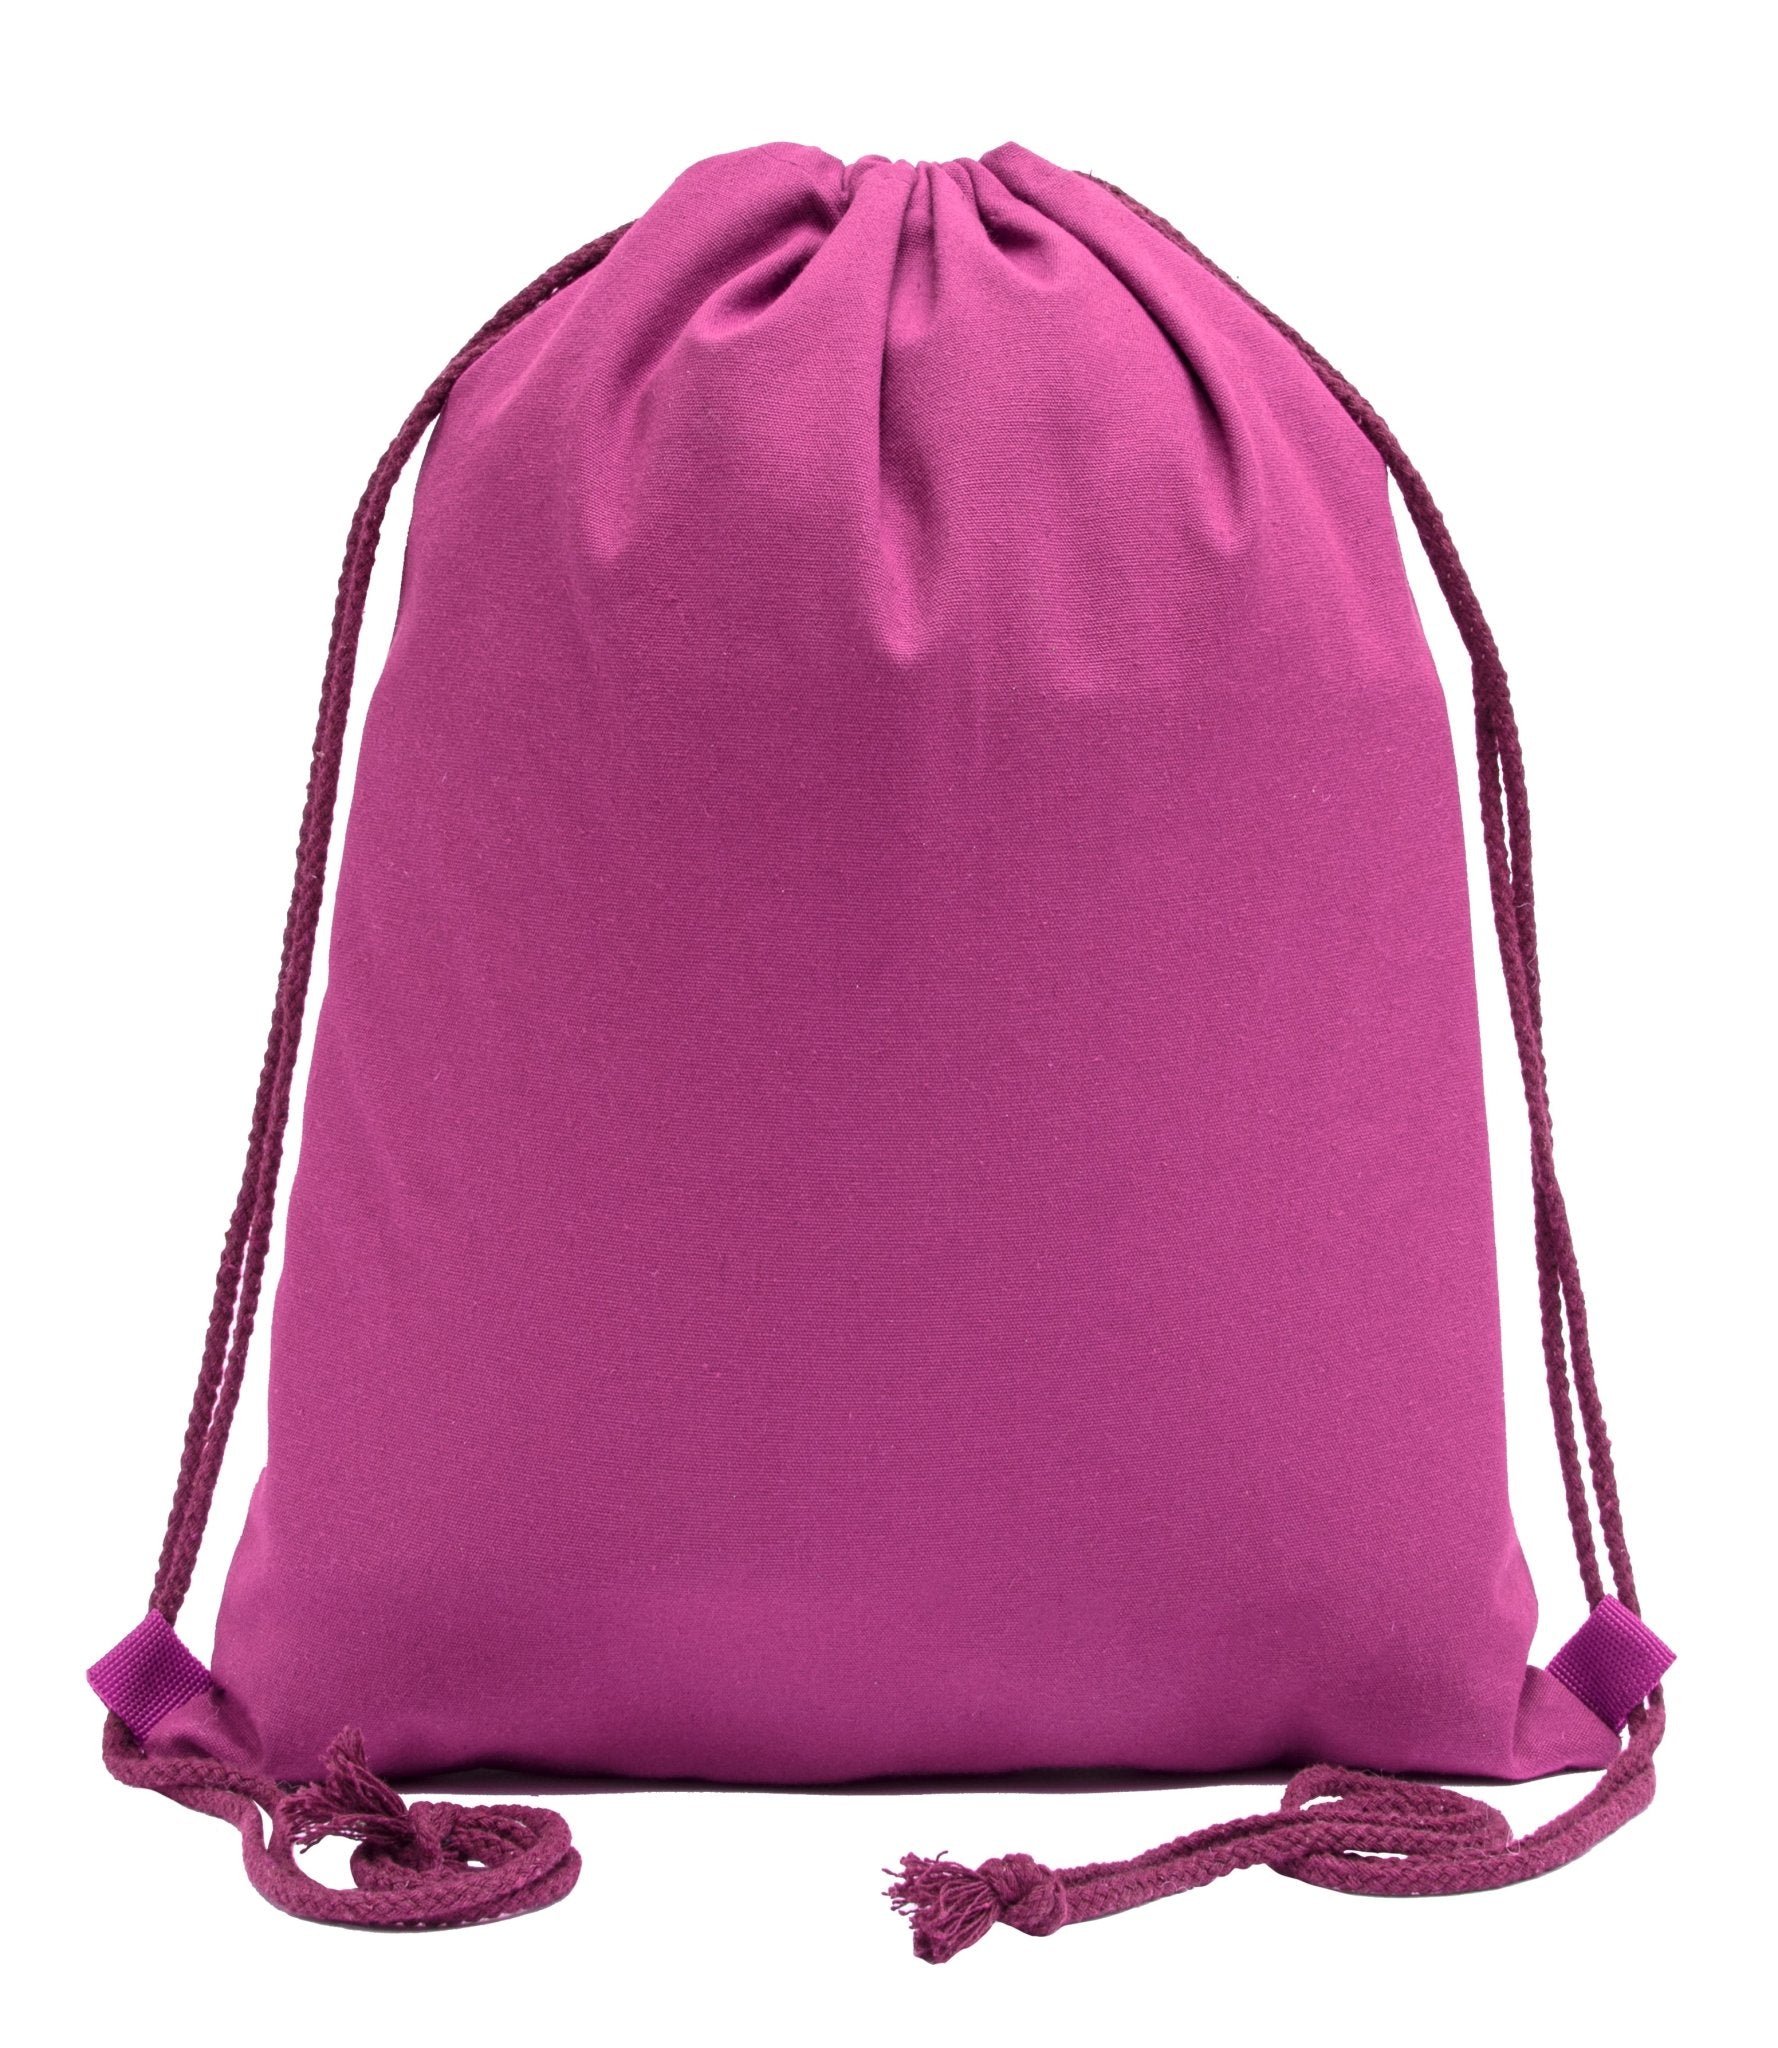 Drawstring Bag 100% Cotton For Promotional Use, Packaging Sports & Travel